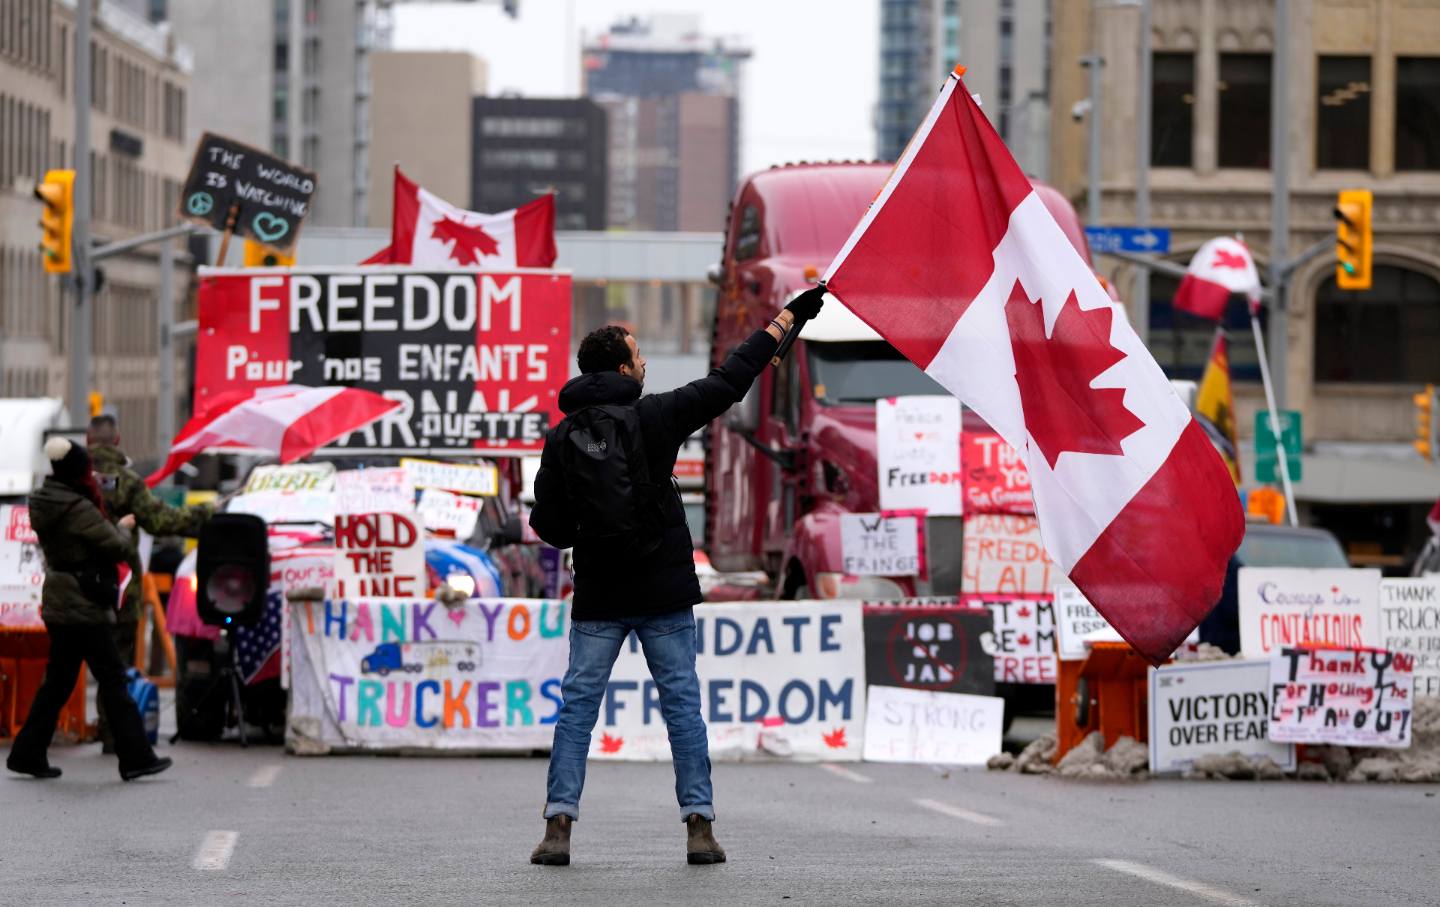 A man with his back to the camera waves a Canadian flag in front of a protest